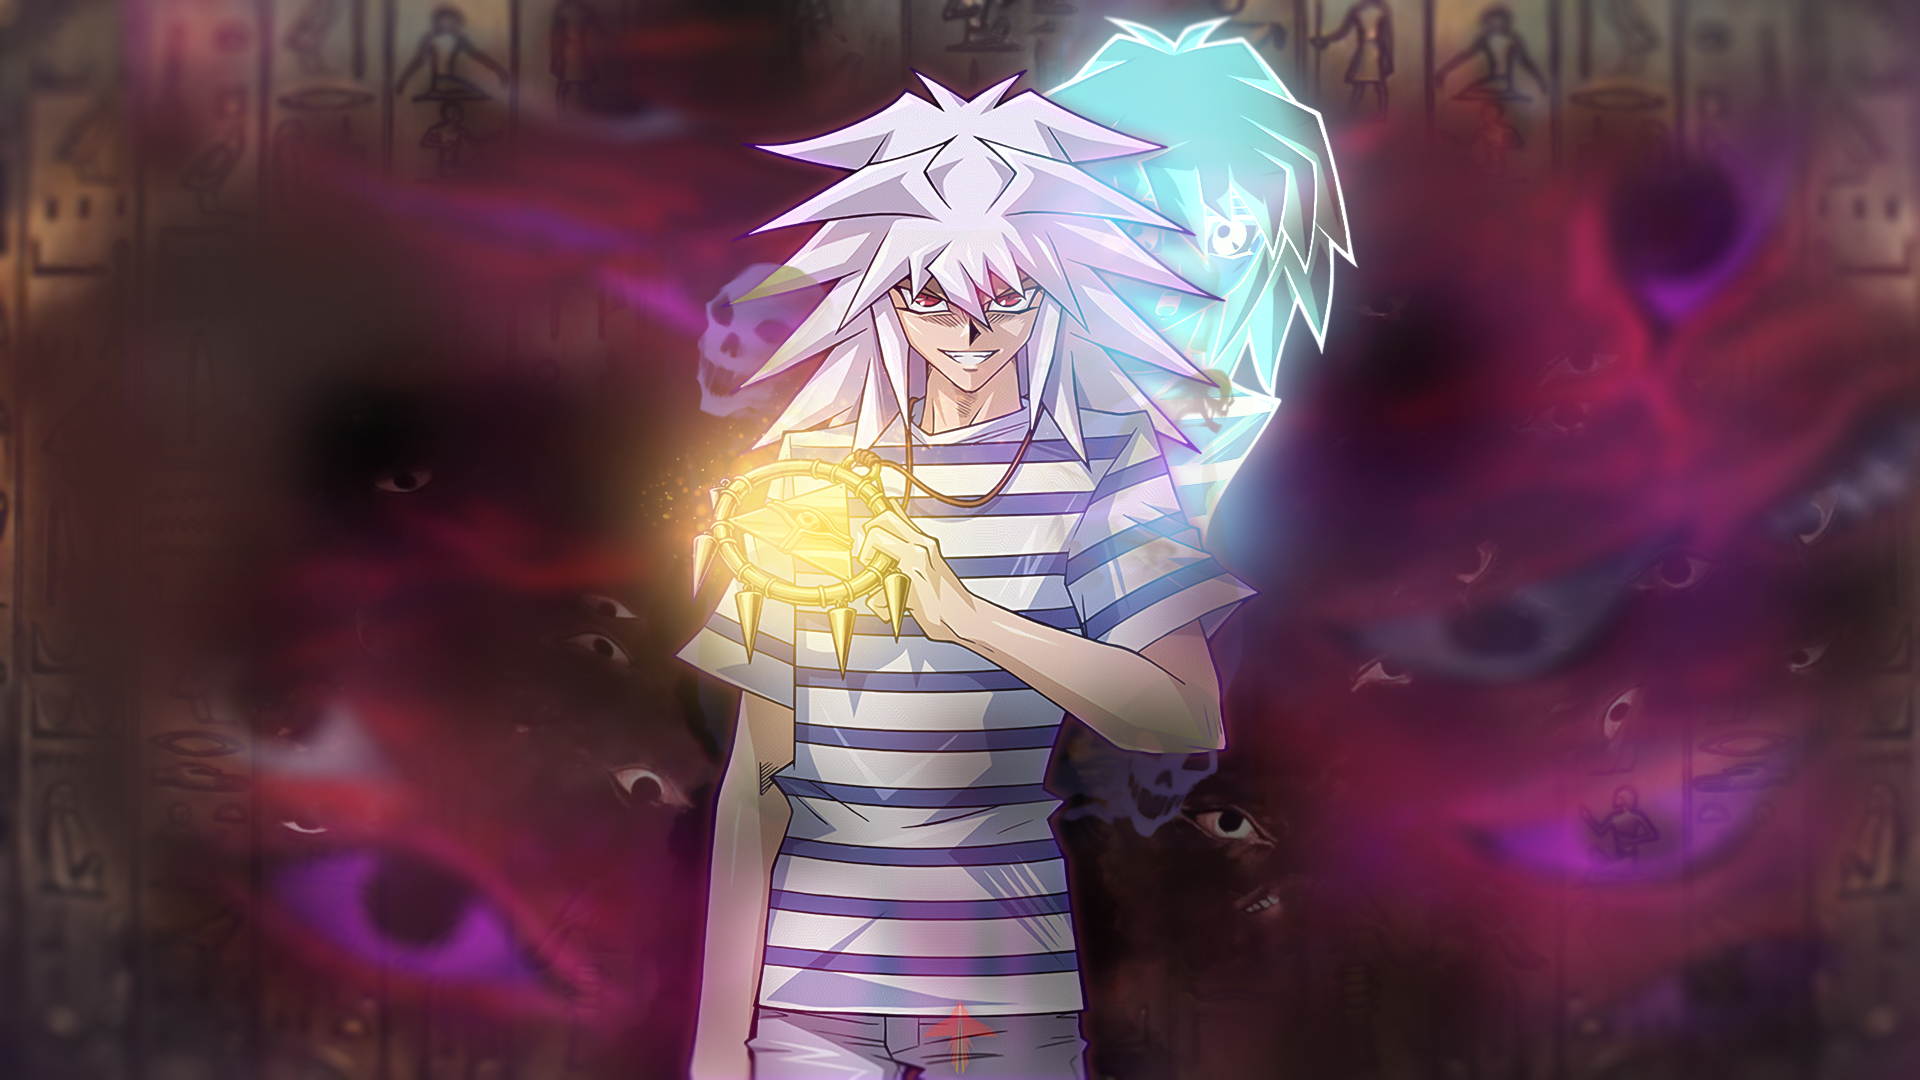 Bakura wallpaper + Ygopro sleeves (link in the comments)